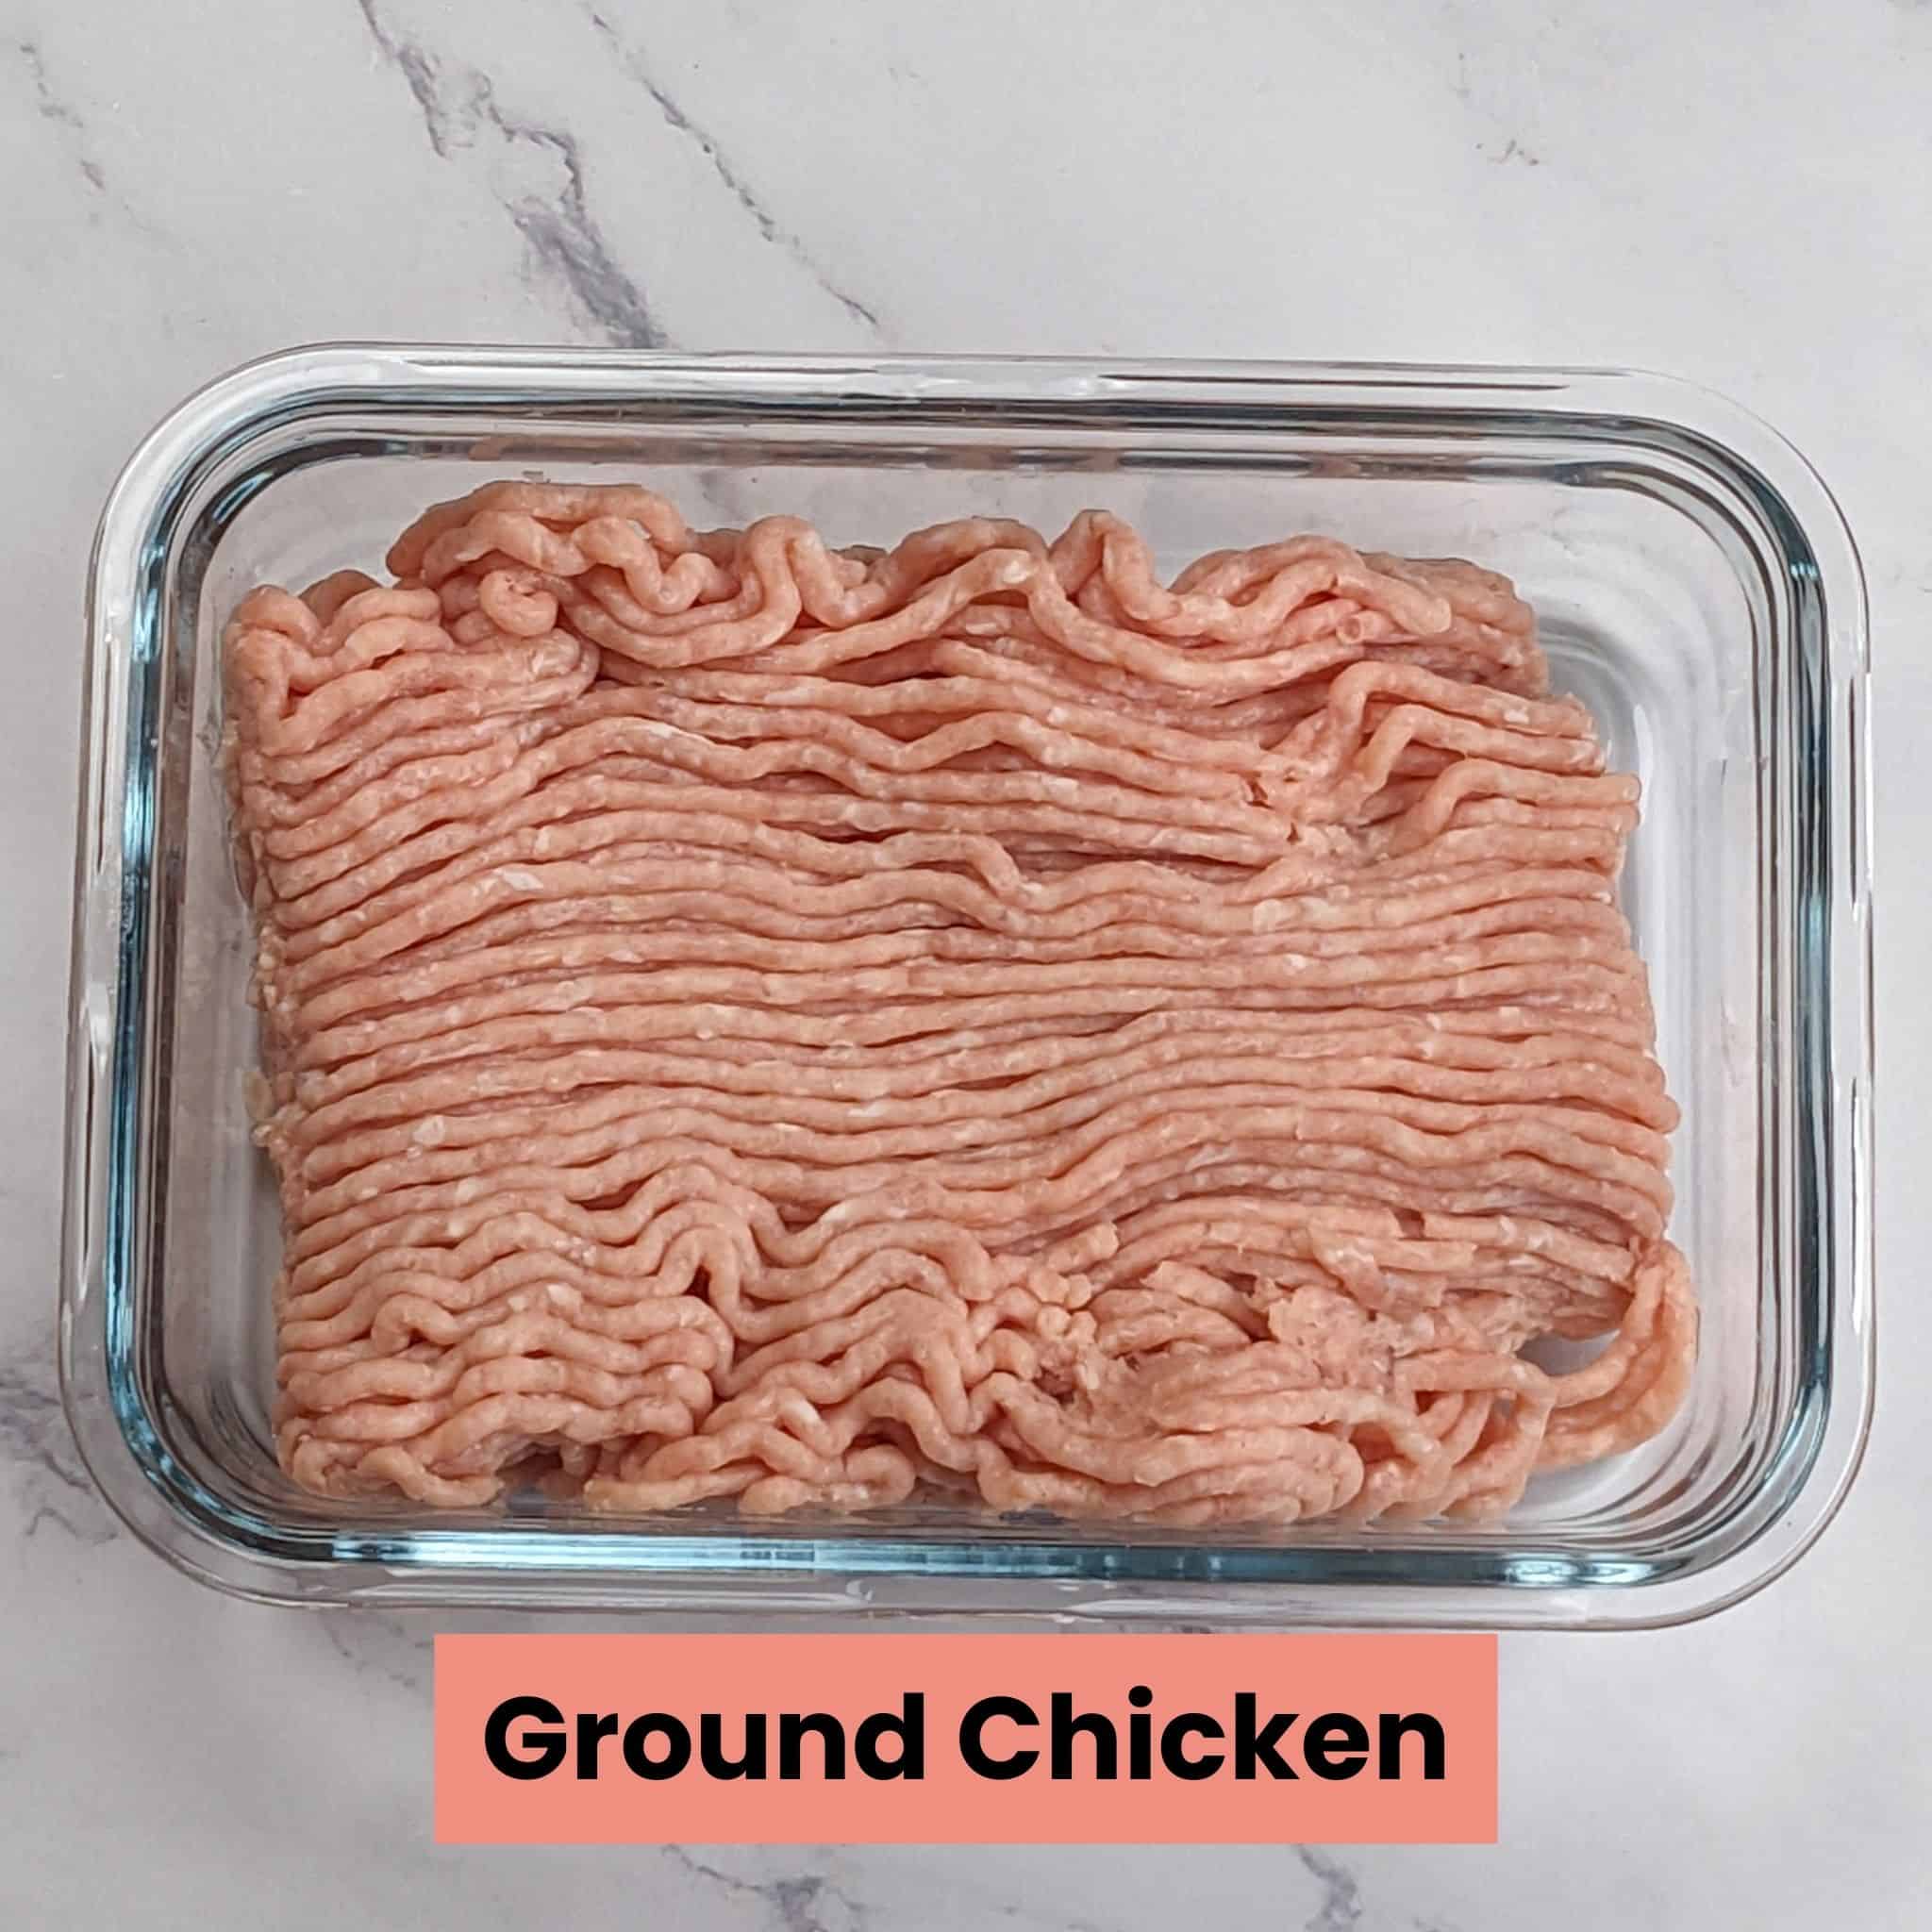 store-bought ground chicken in a glass rectangle container.